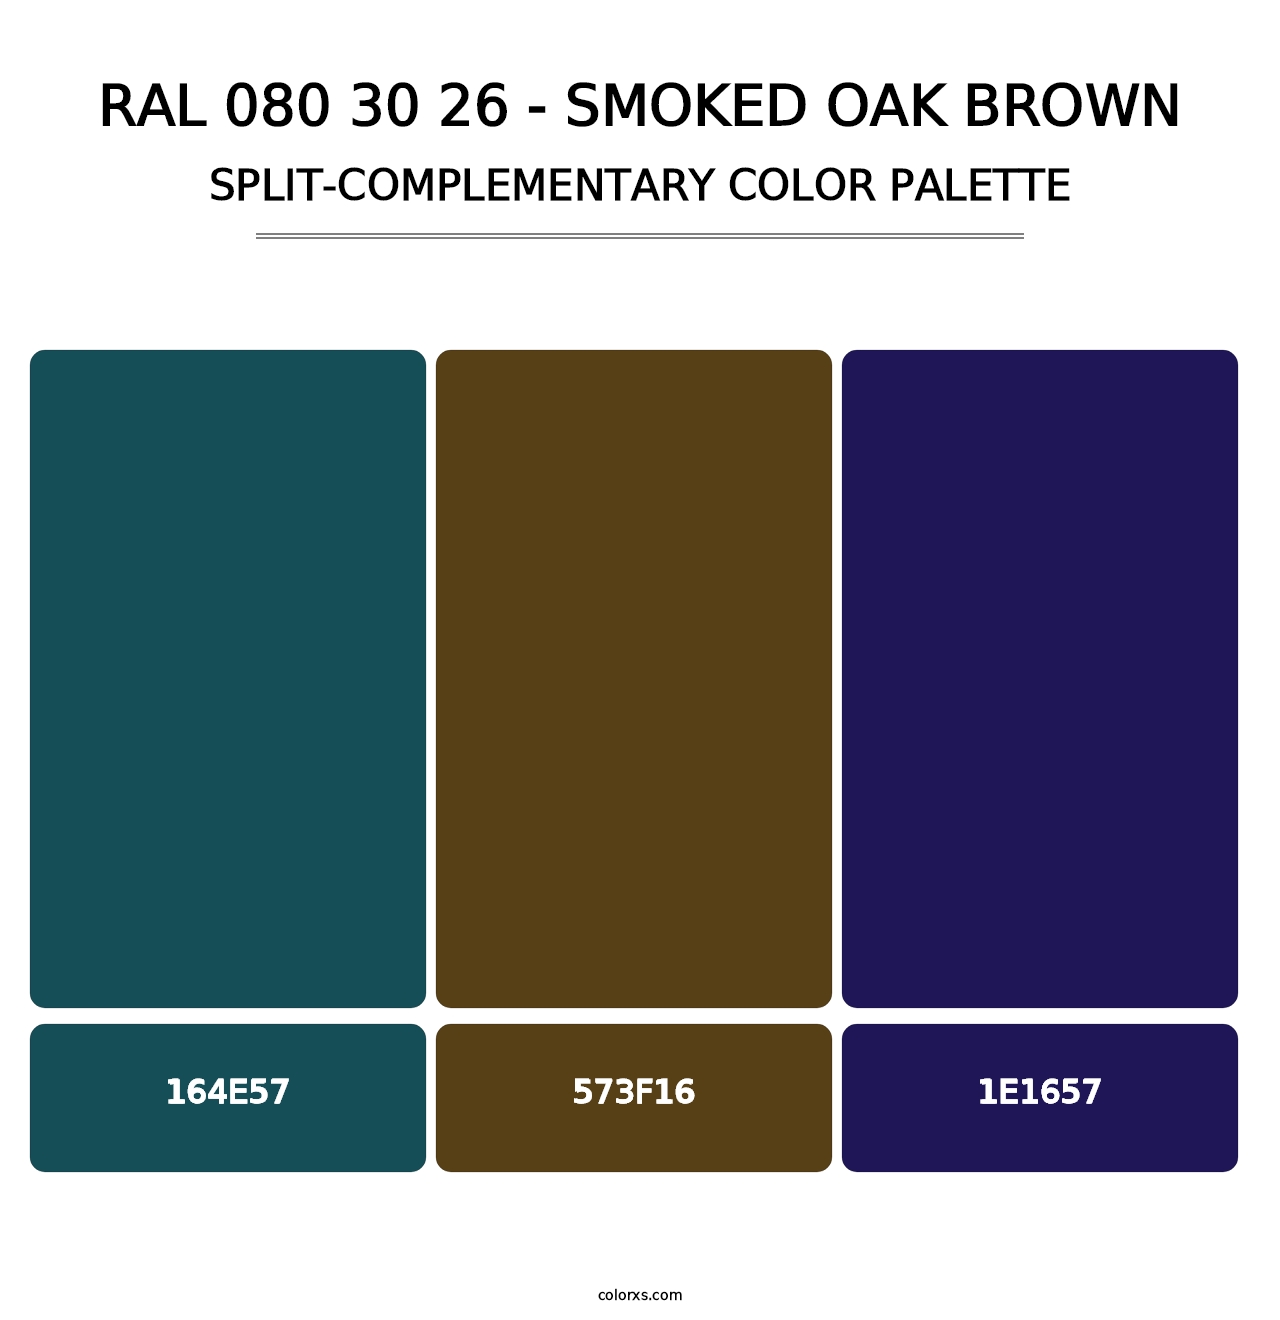 RAL 080 30 26 - Smoked Oak Brown - Split-Complementary Color Palette